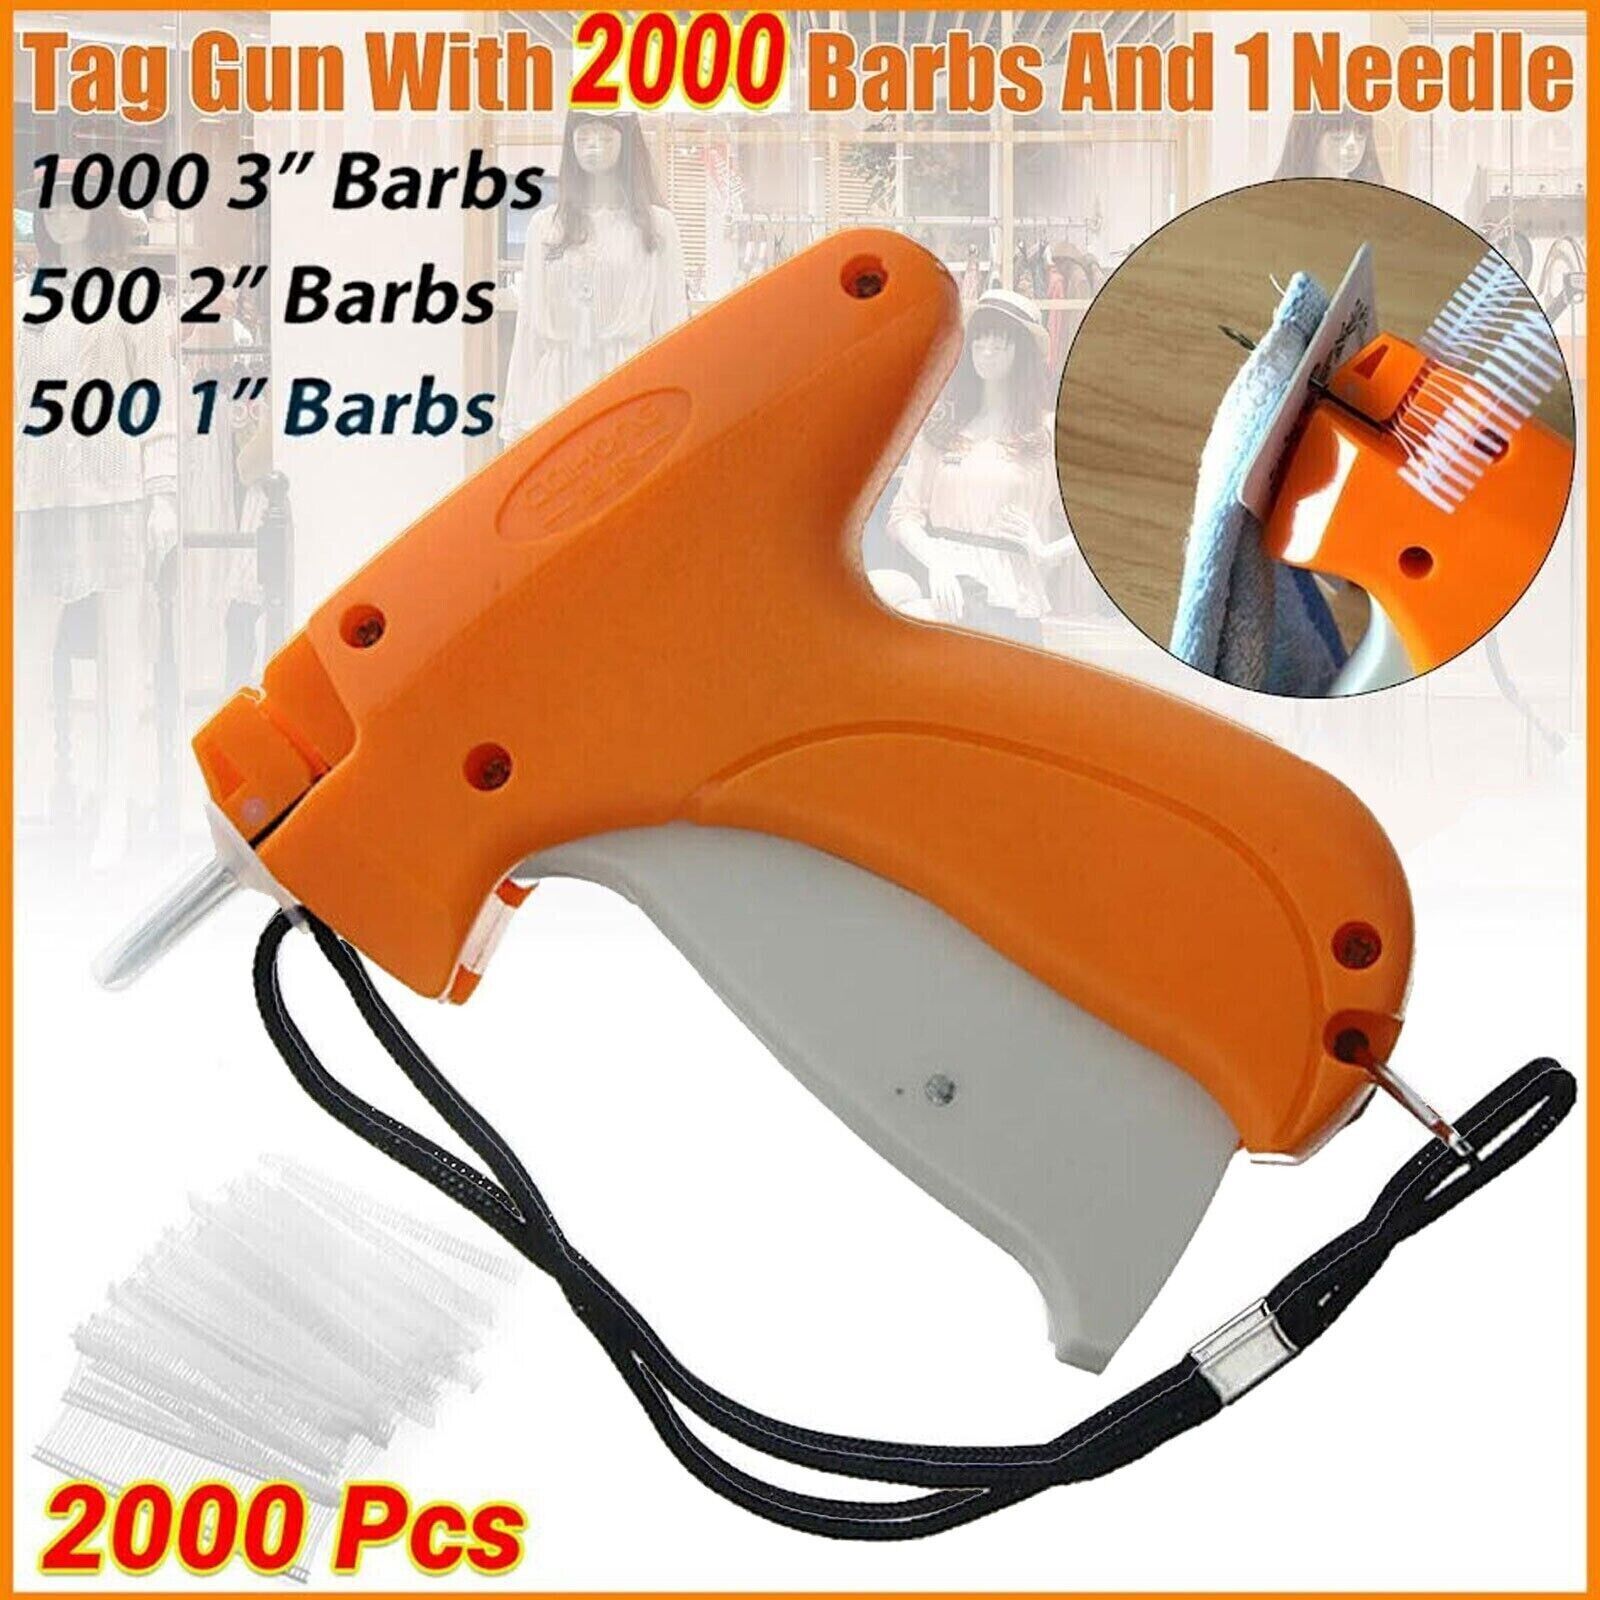 Garment CLOTHING PRICE LABEL TAGGING TAG TAGGER GUN WITH 2000 BARBS 1 Needle 